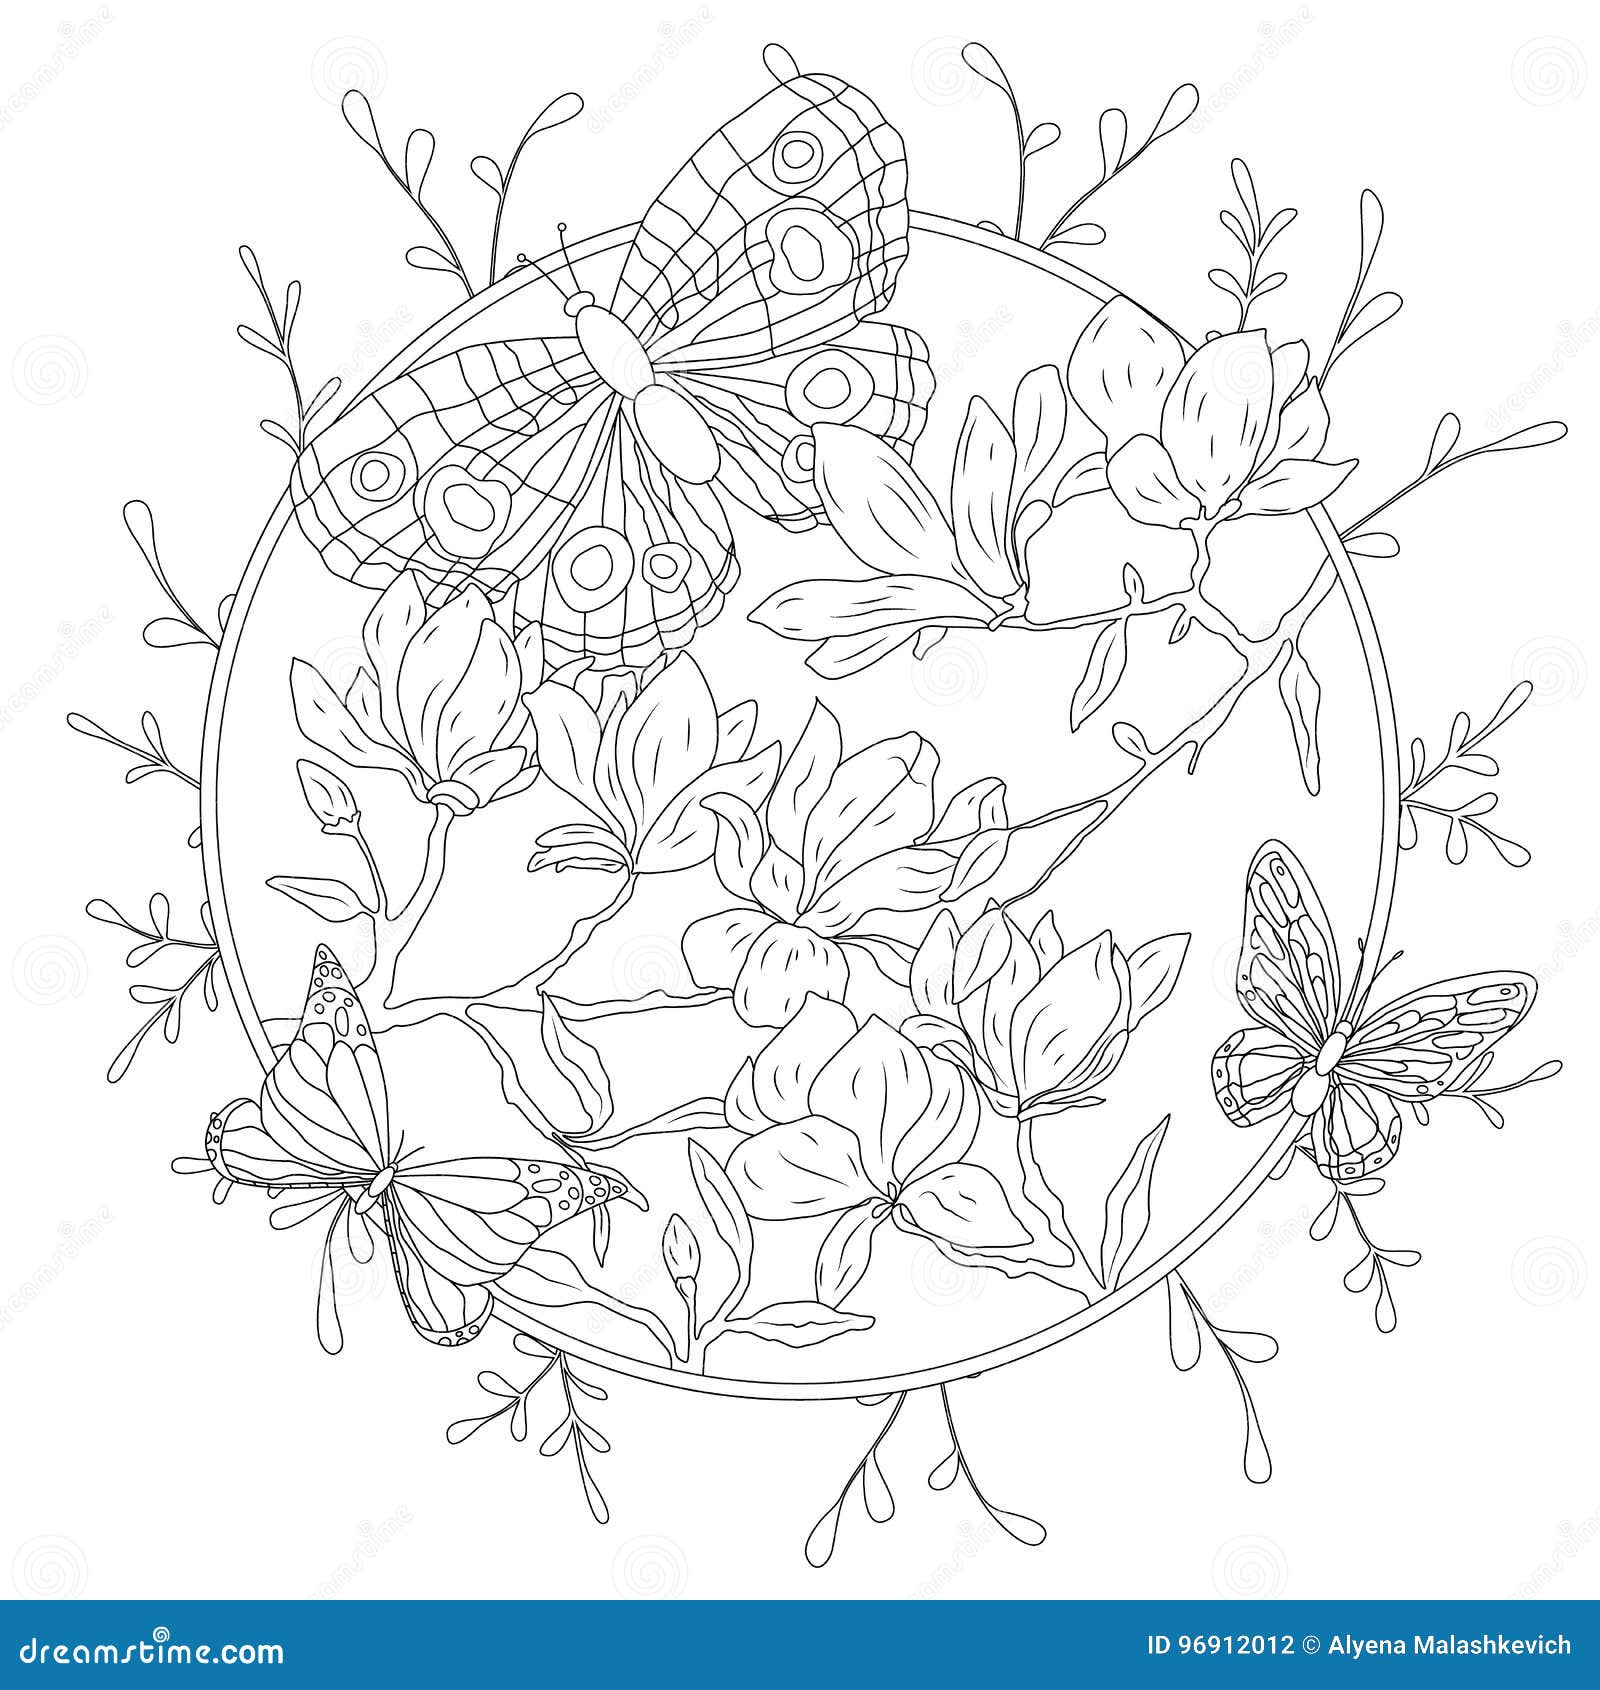 Coloring book for adult and older children coloring page with decorative vintage flowers and decorative butterflies stock vector